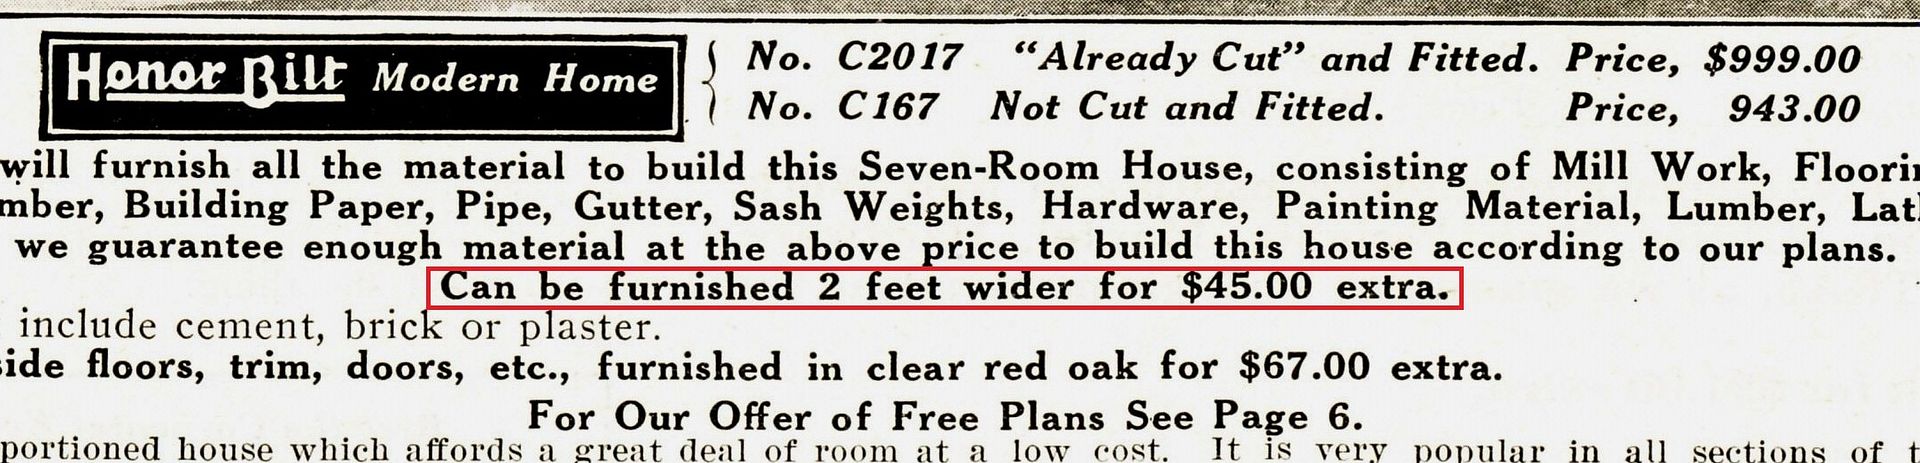 In 1916, you could supersize your Sears Maytown by getting two extra feet added to its width. By 1921, the 